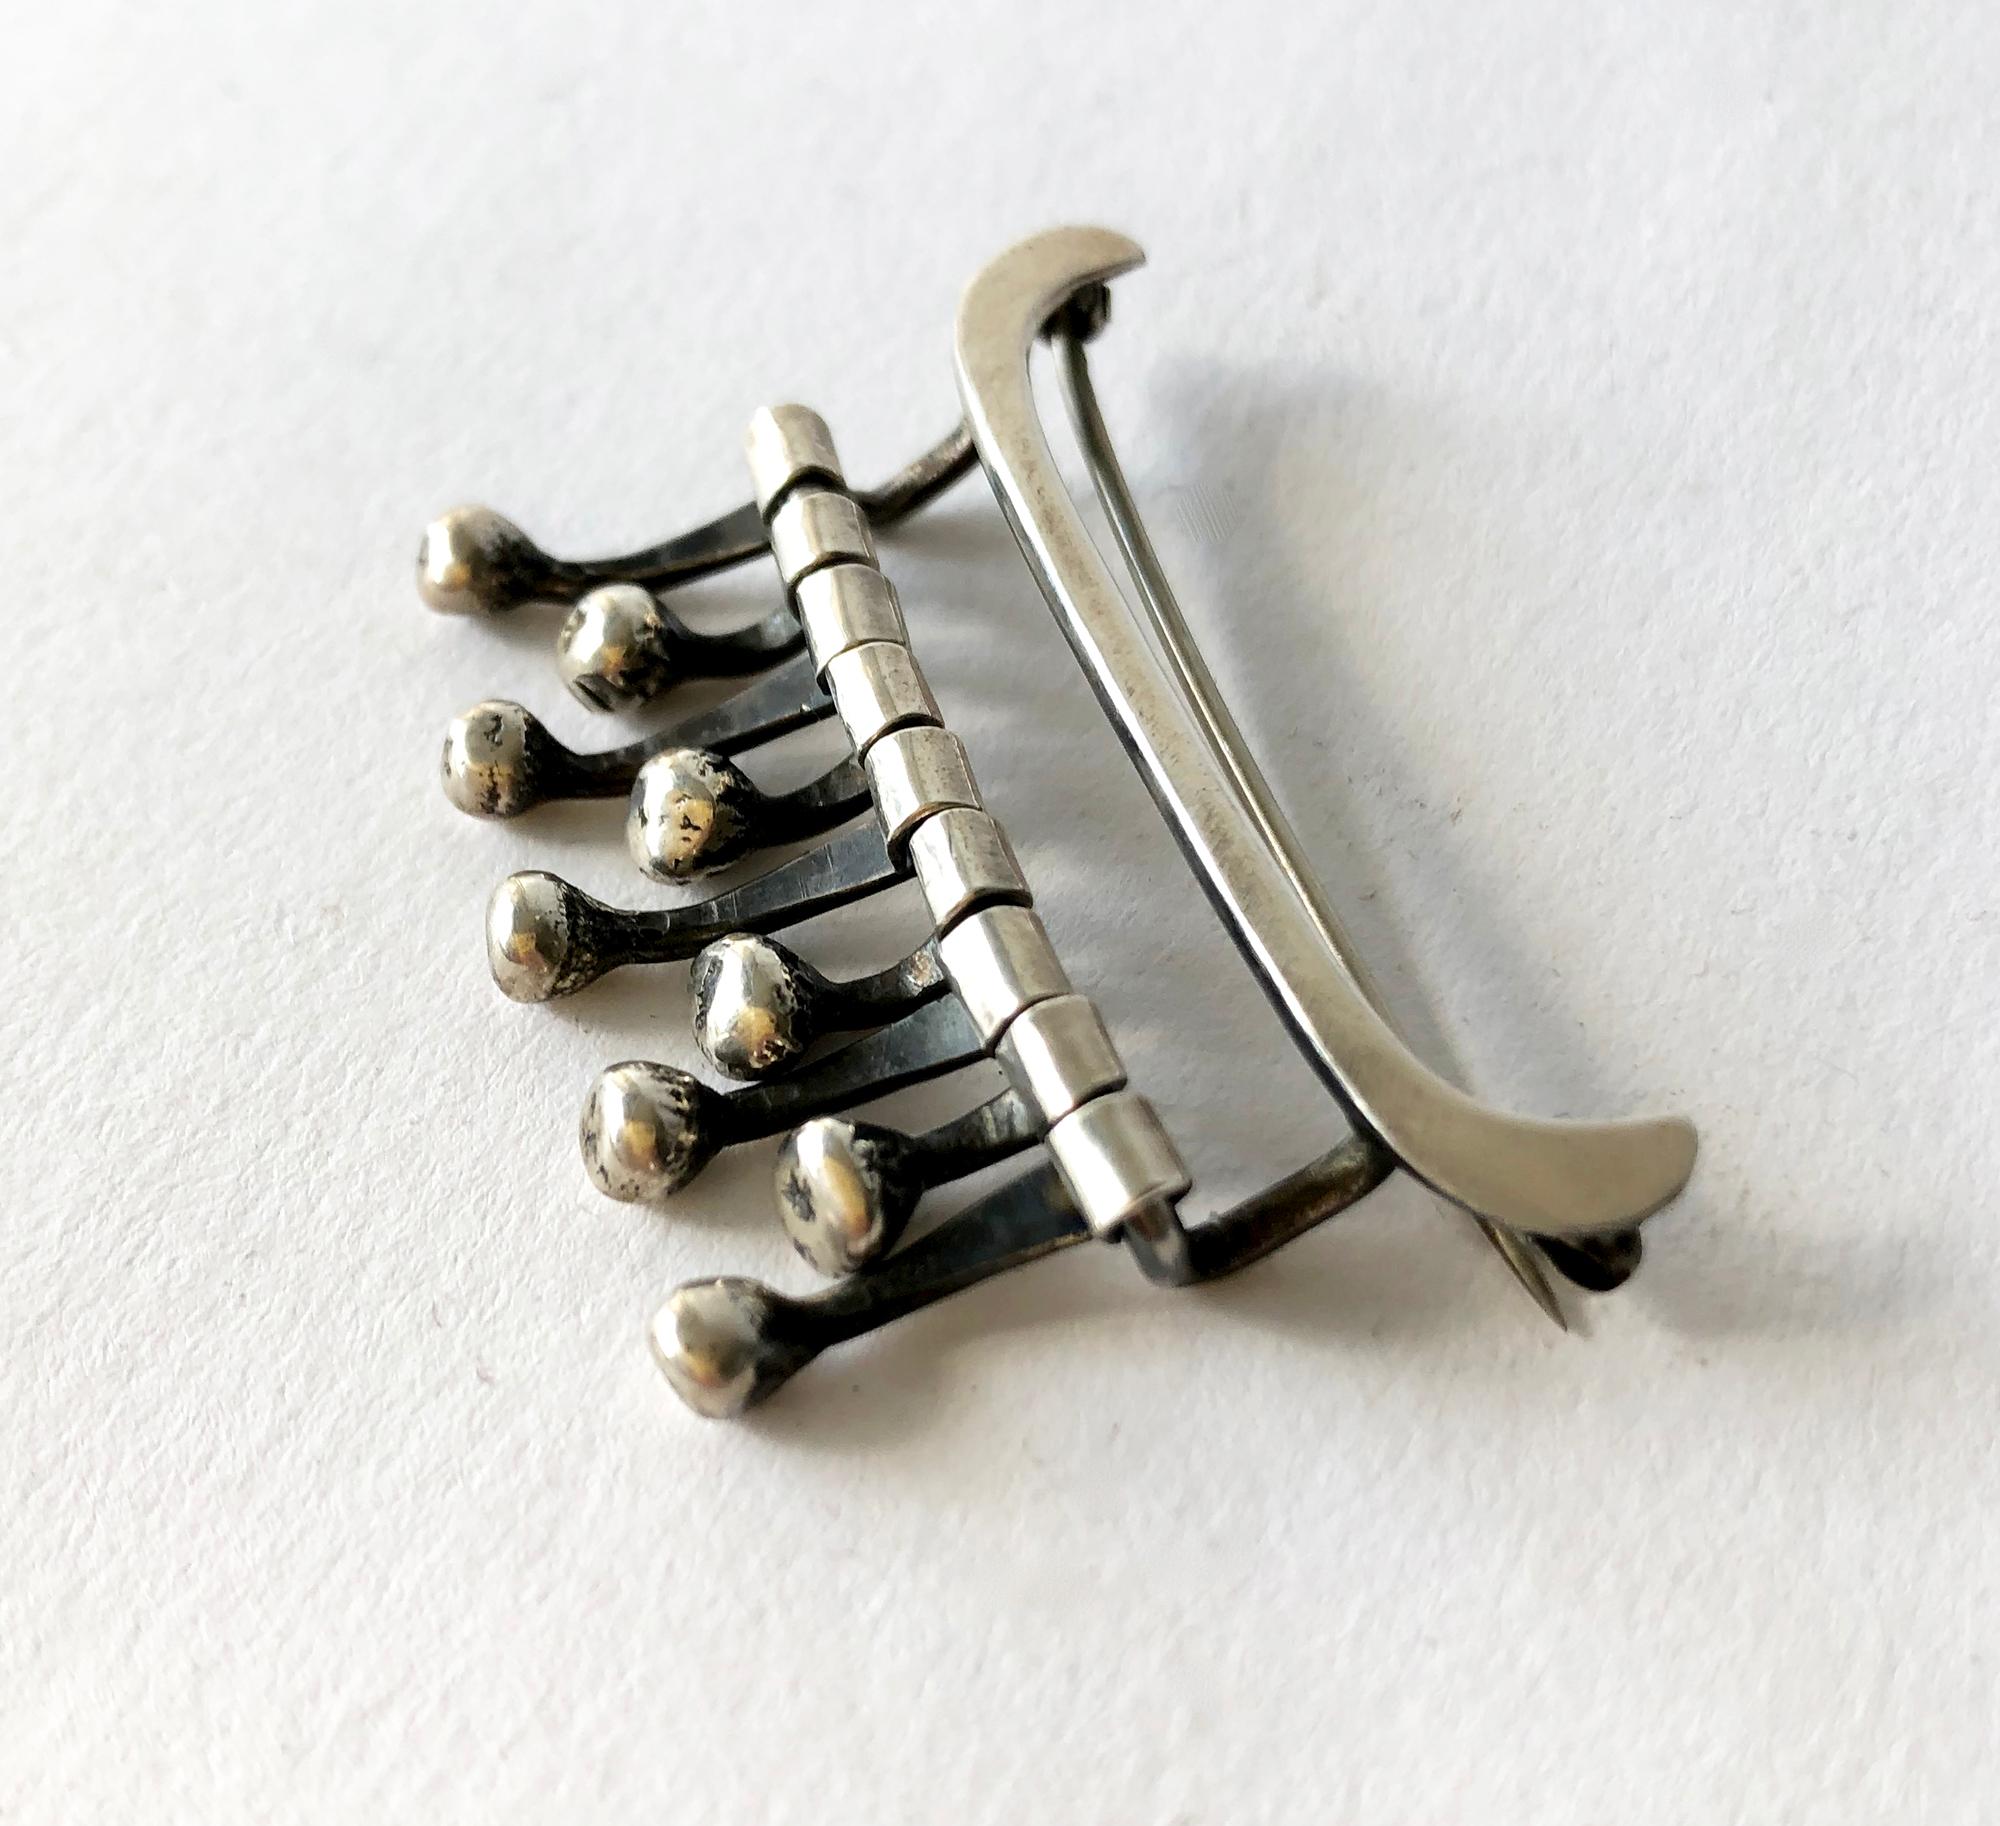 Kinetic, hand made sterling silver brooch created by Ruth Berridge of New York City, New York.  Brooch measures 1 1/2